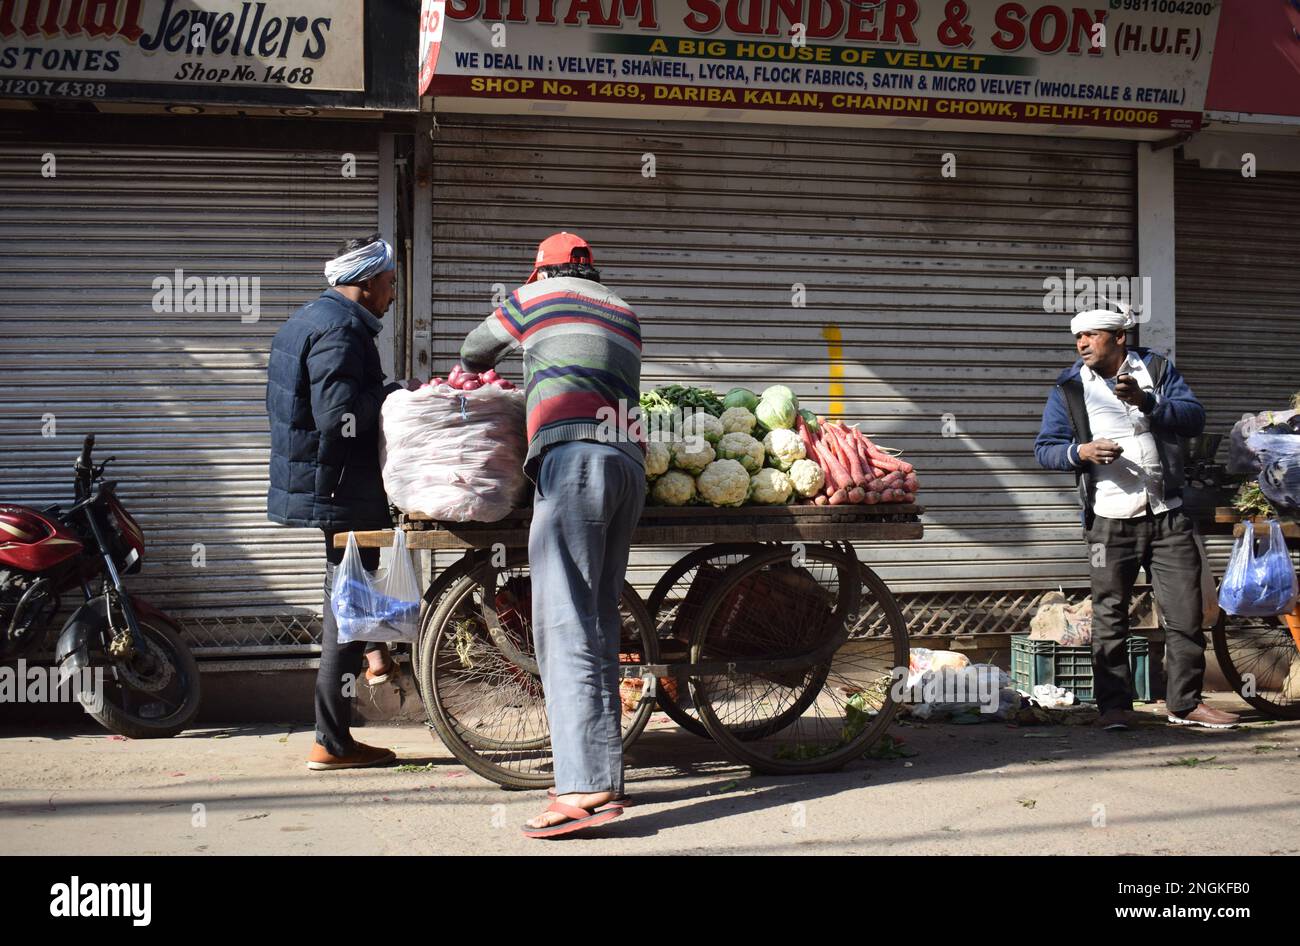 A fresh vegetable seller selling produce including carrots and cabbages from a cart in the streets of Old Delhi Stock Photo